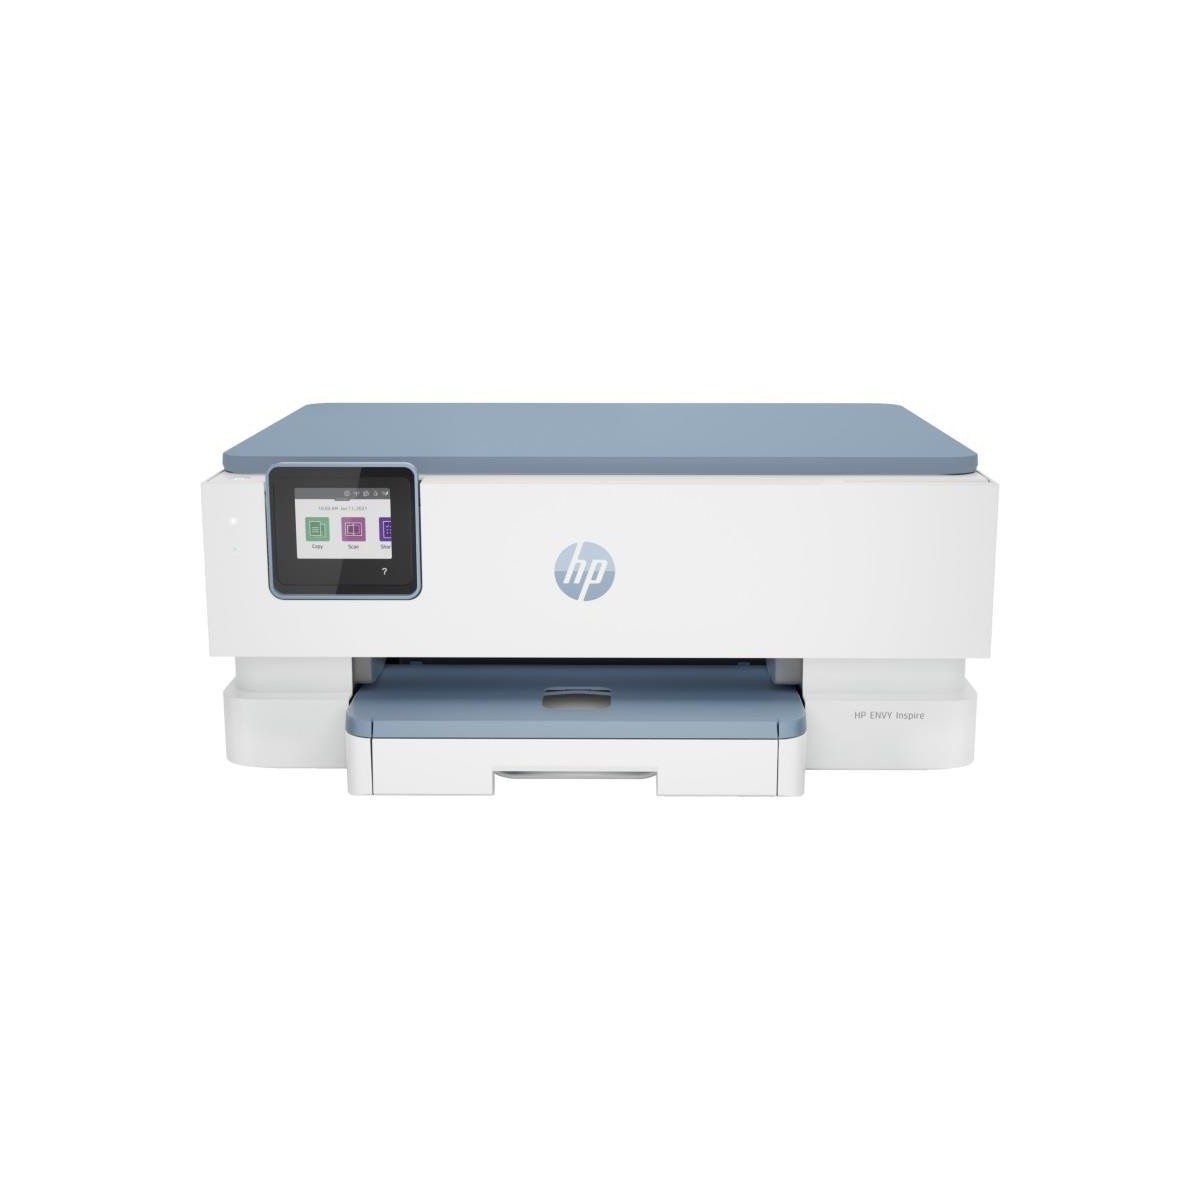 HP ENVY Inspire 7221e All-in-One Printer - Color - Printer for Home and home office - Print - copy - scan - Wireless + Instant I